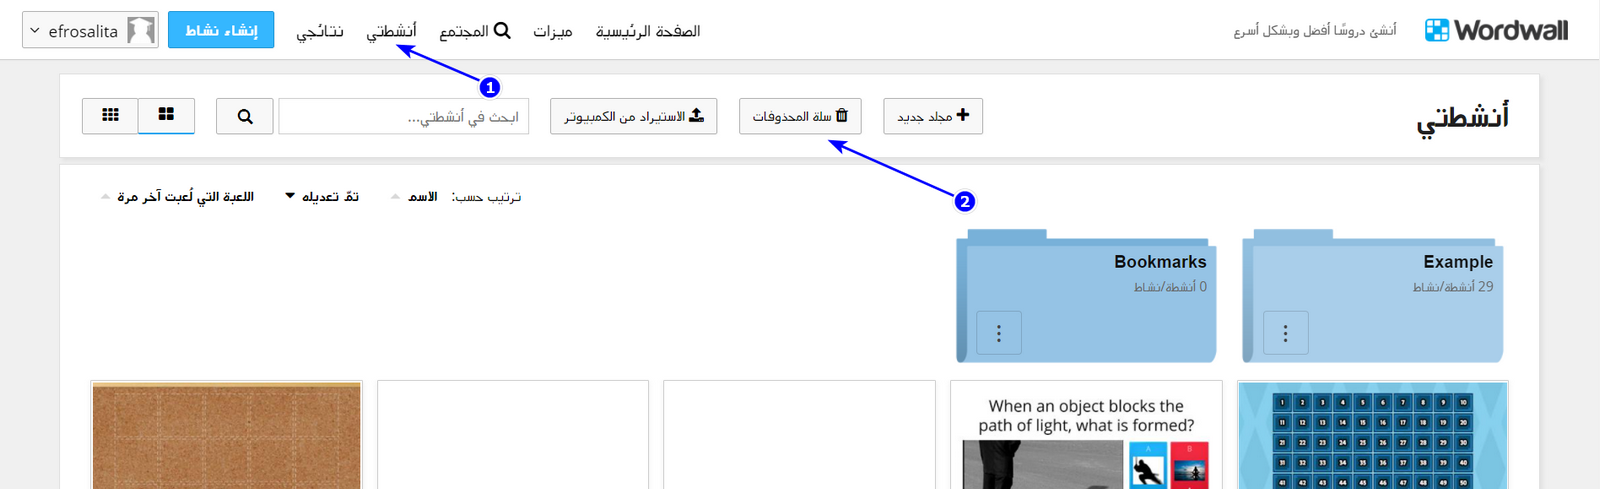 How_to_restore_a_deleted_activity_-_Arabic_1.png